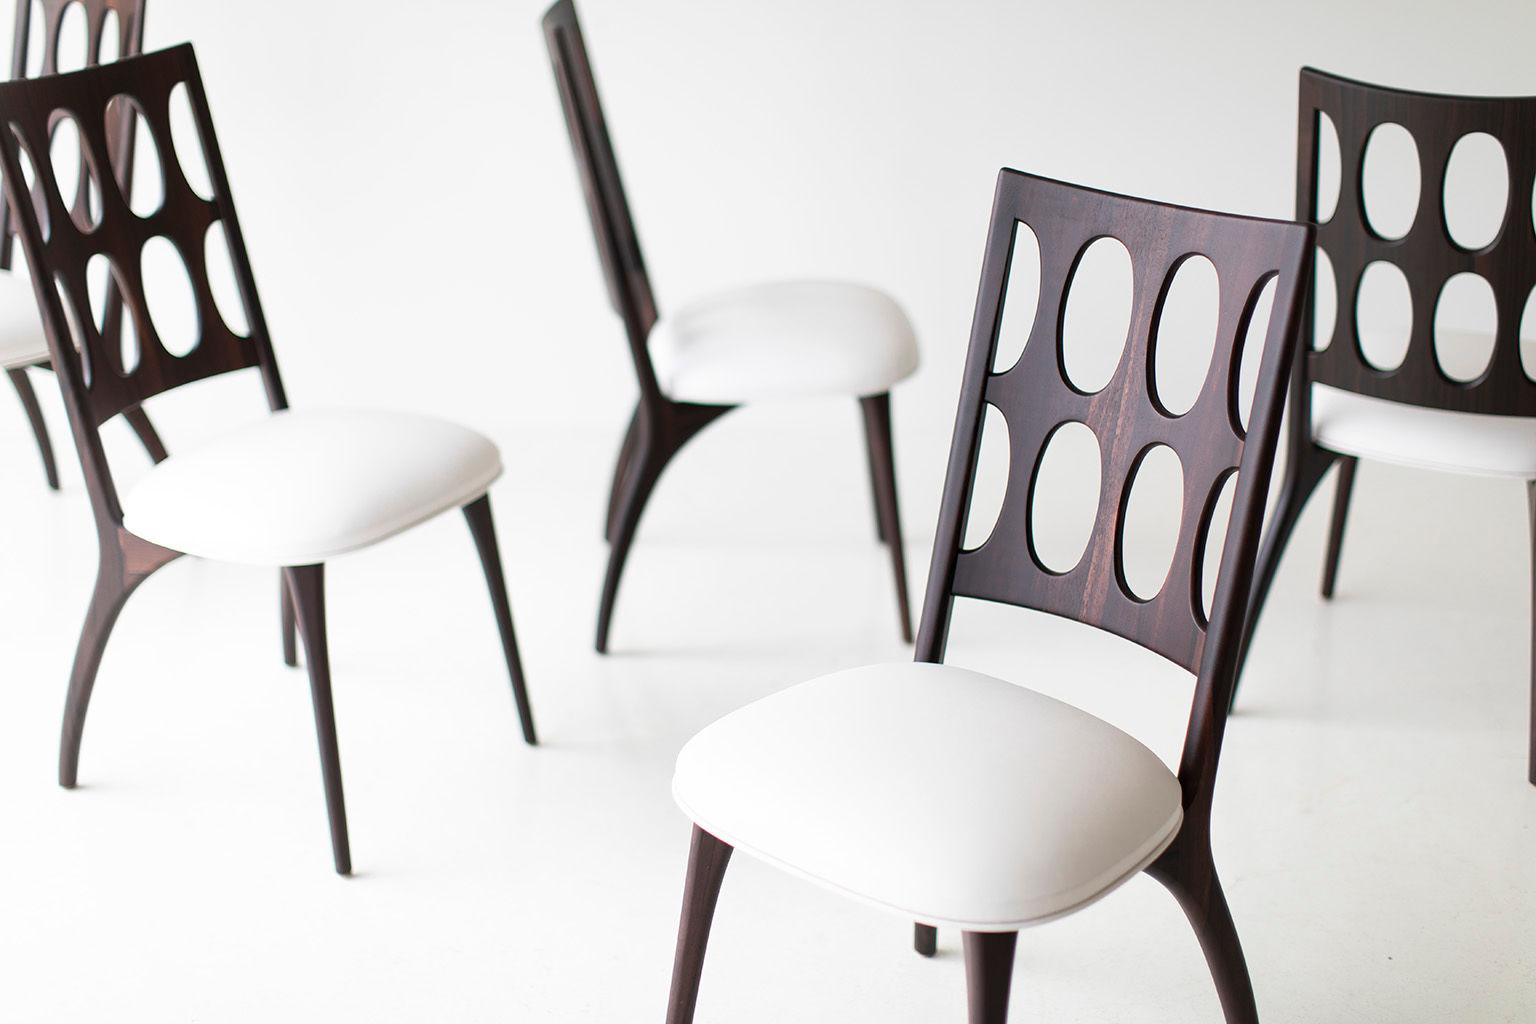 CraftAssociates Dining Chairs, Modern Dining Chairs, 1901, White Leather

These modern dining chairs, 1901 for Craft Associates Furniture in white leather are expertly handcrafted. Each chair base is constructed by hand from hard wood. The chairs